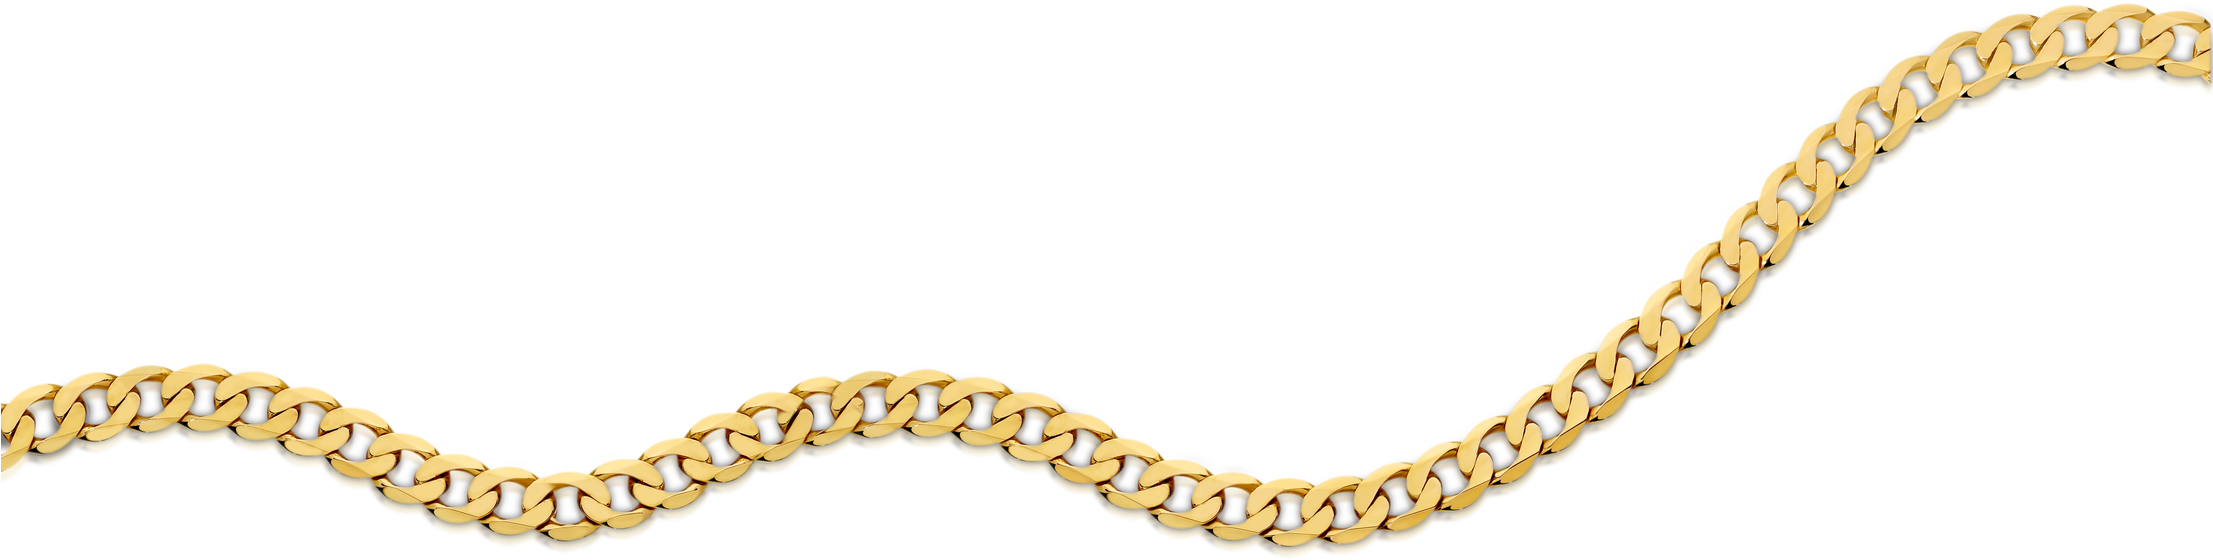 Golden Chain Wave Pattern PNG image